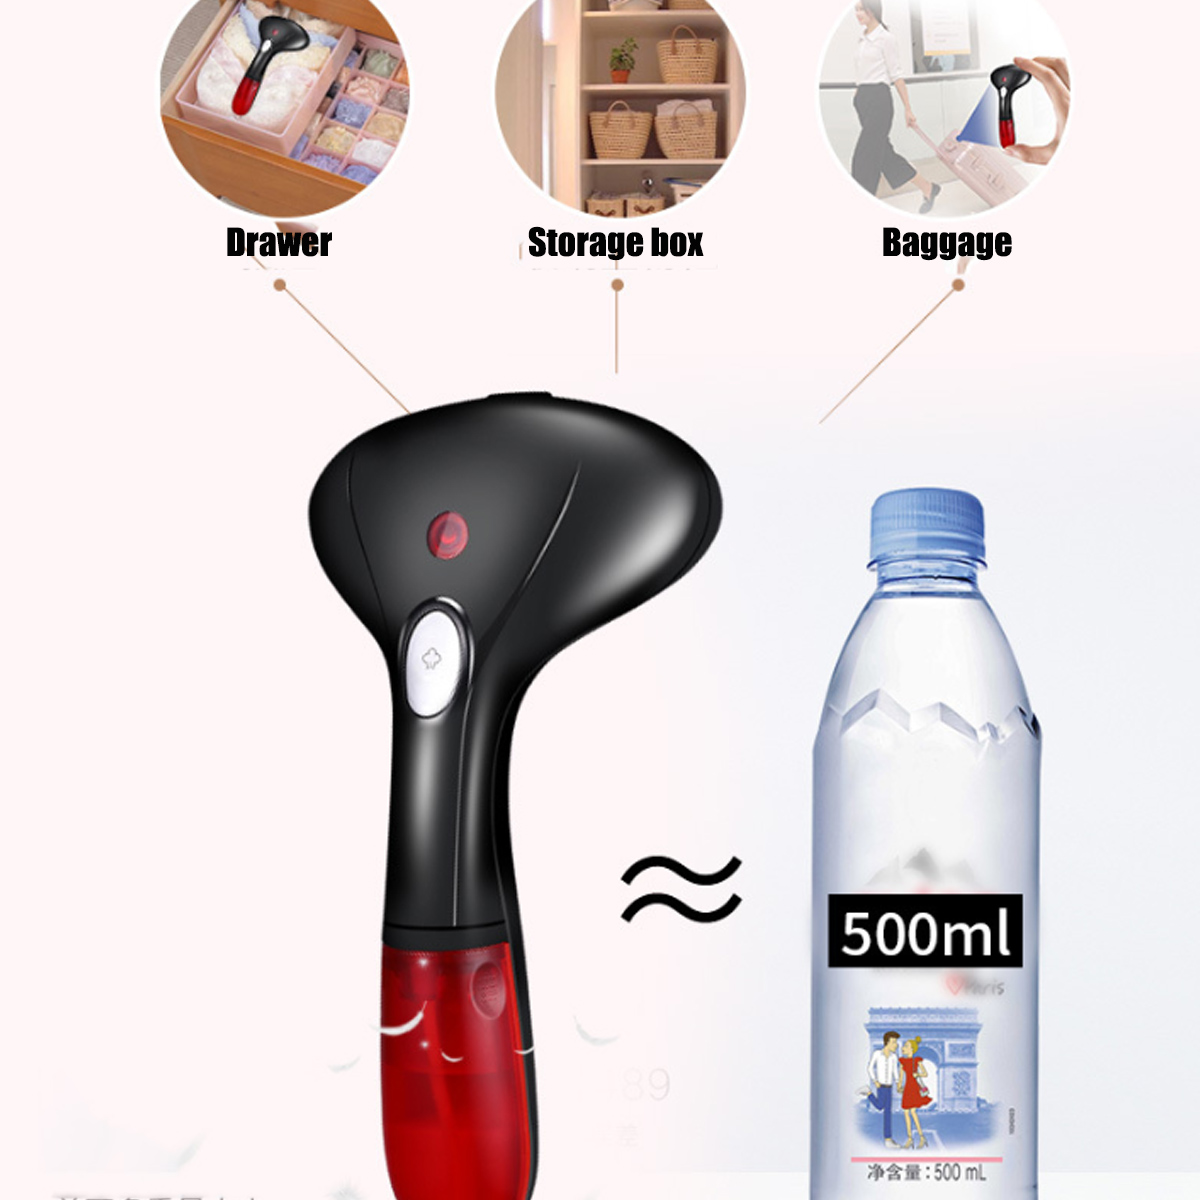 Portable-Travel-Handheld-Ceramics-Fabric-Clothes-Steamer-Garment-with-Brush-1579871